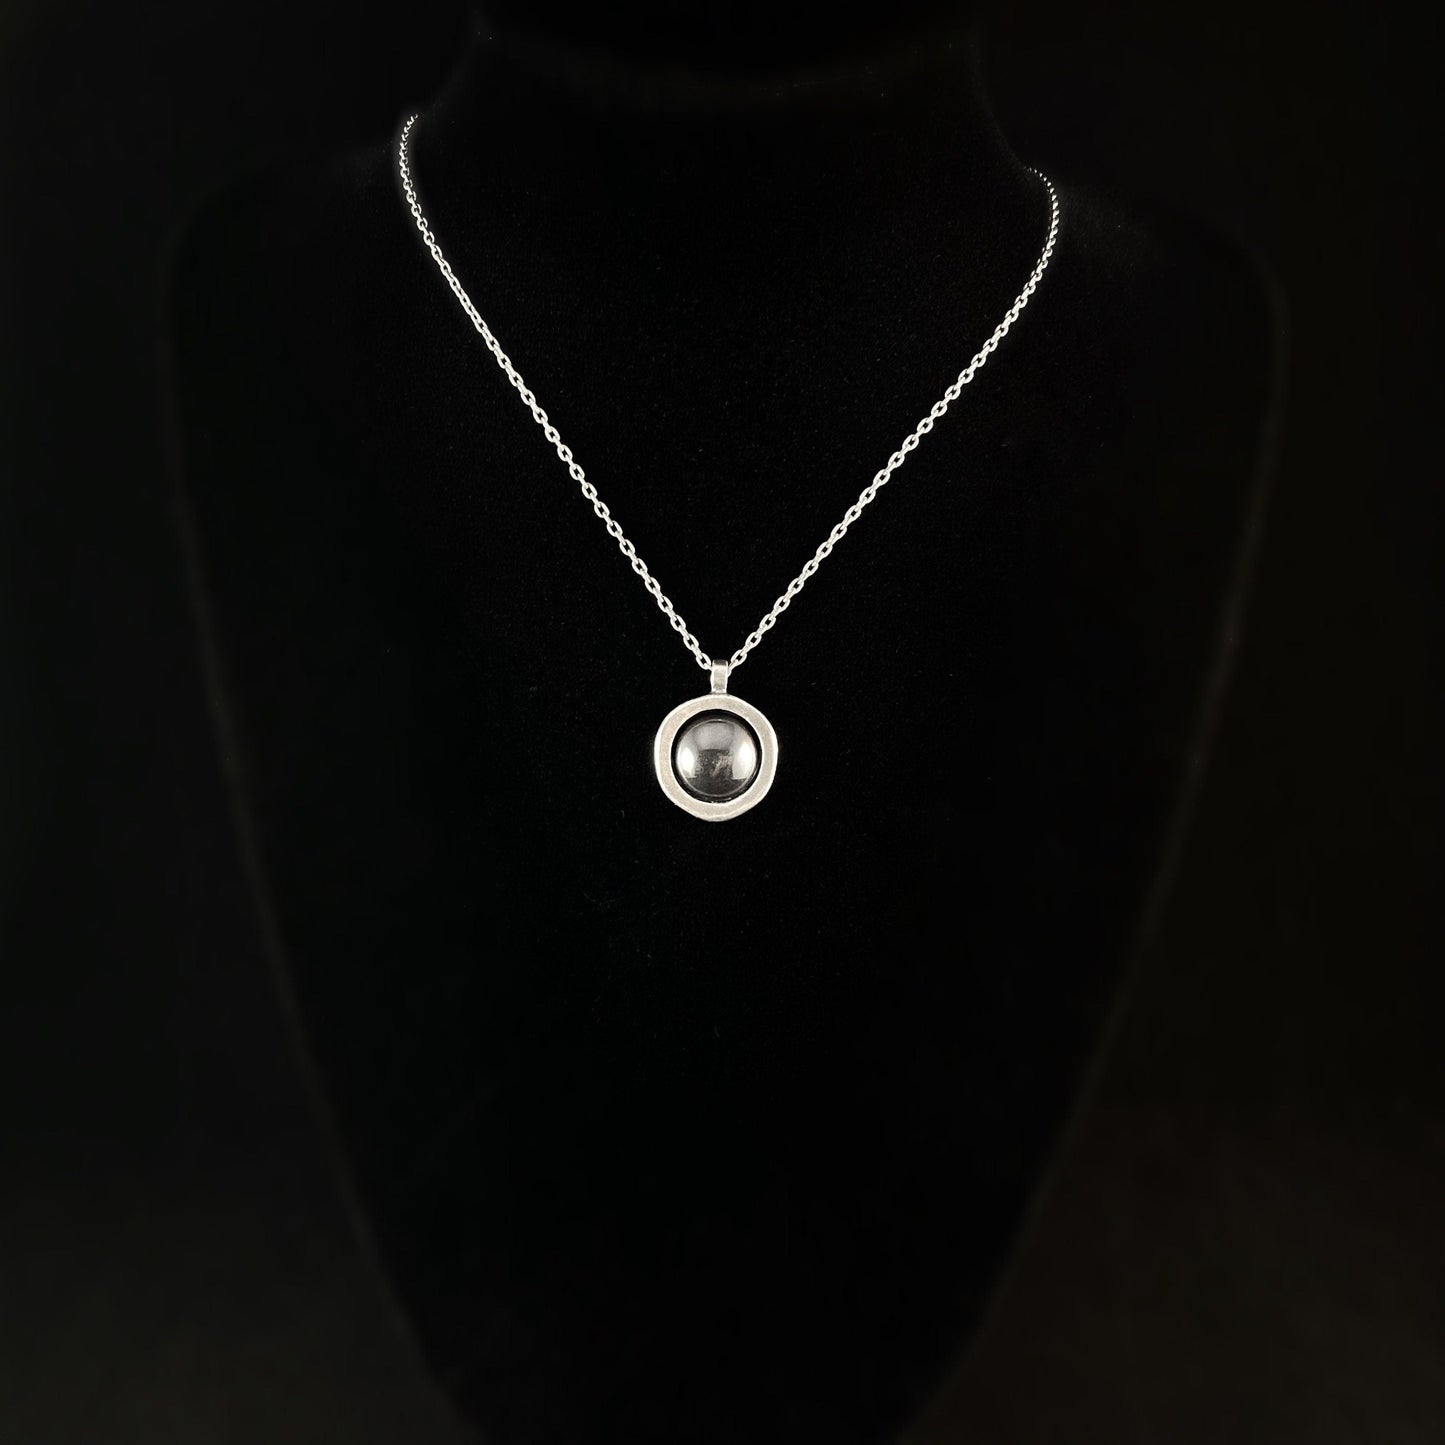 Handmade Silver Circle Pendant Necklace, Made in USA